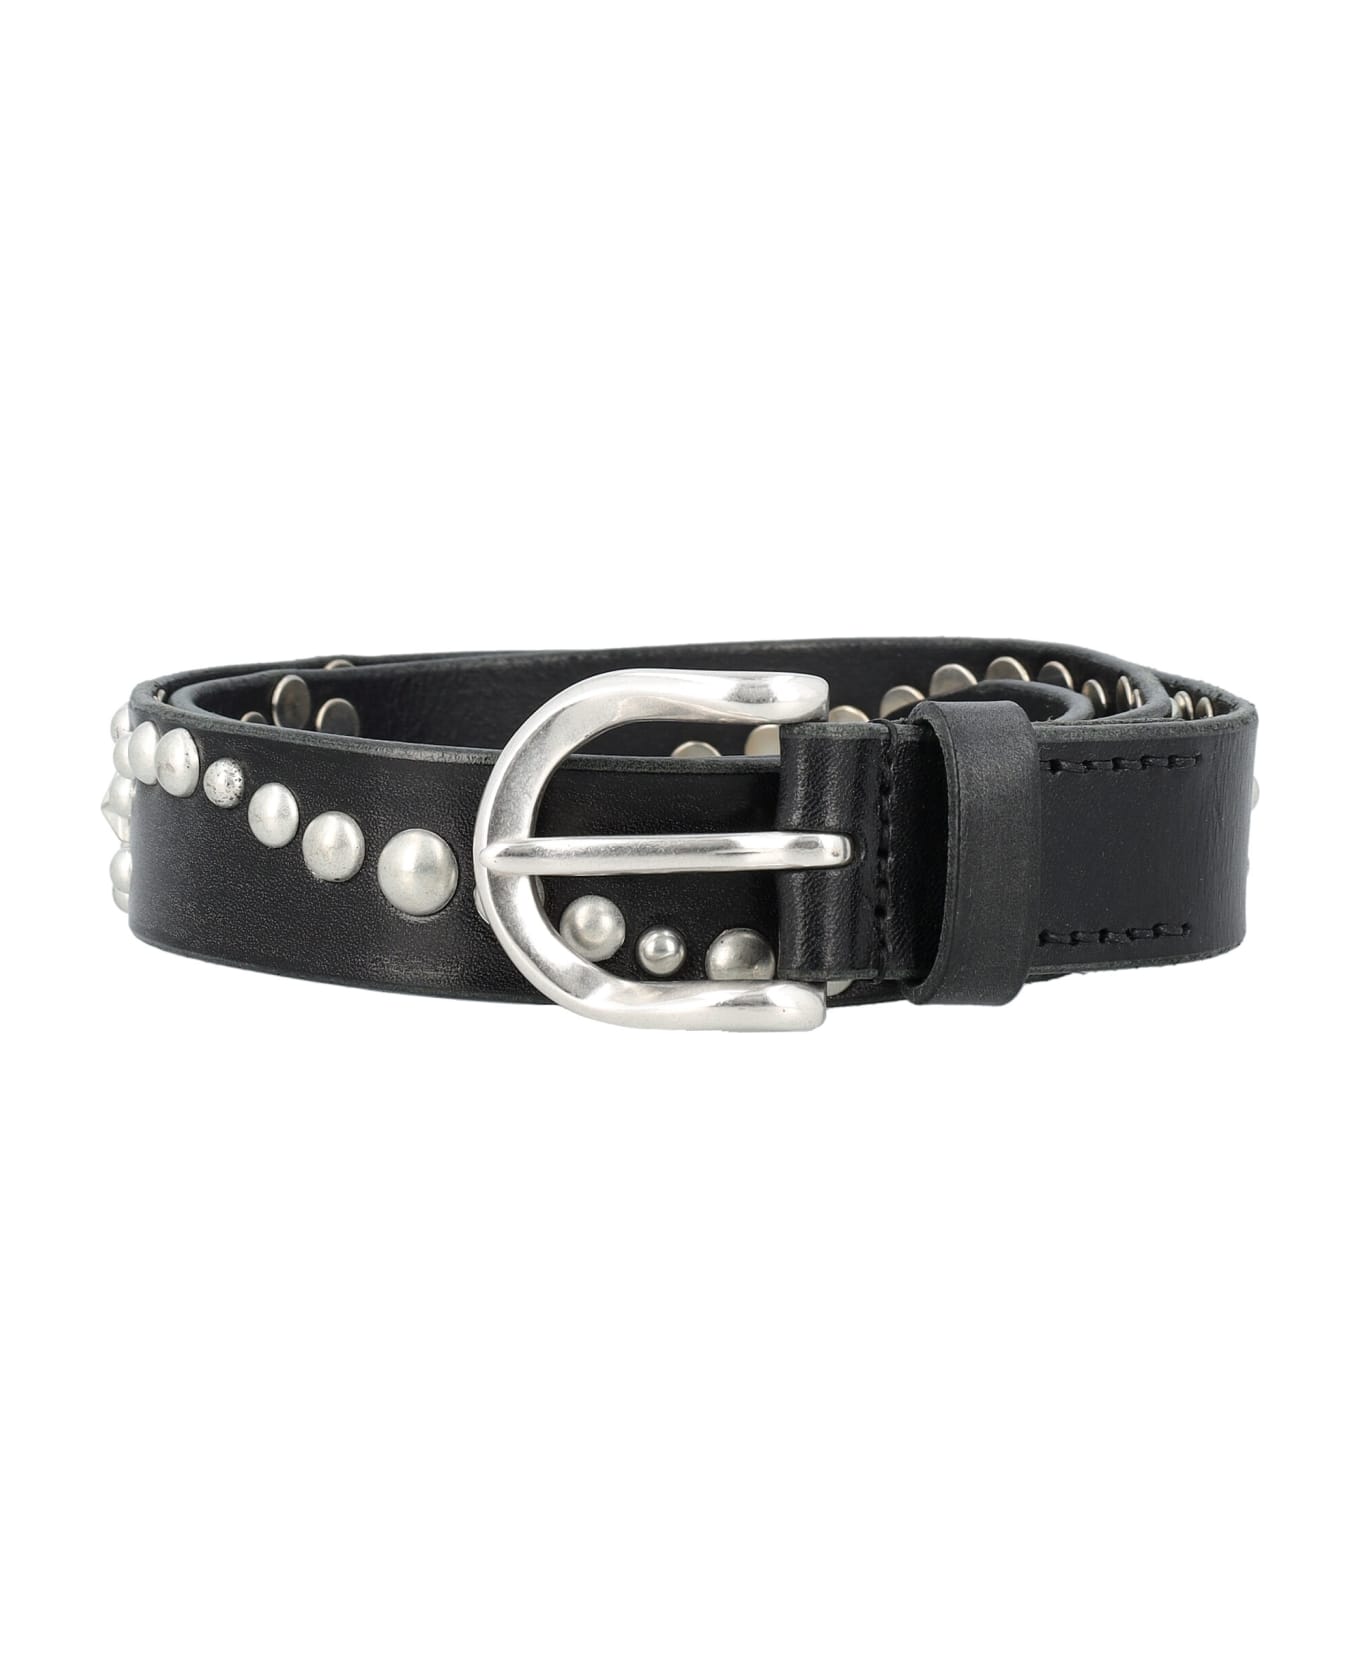 Our Legacy Star Fall Belt - BLACK BRIDLE